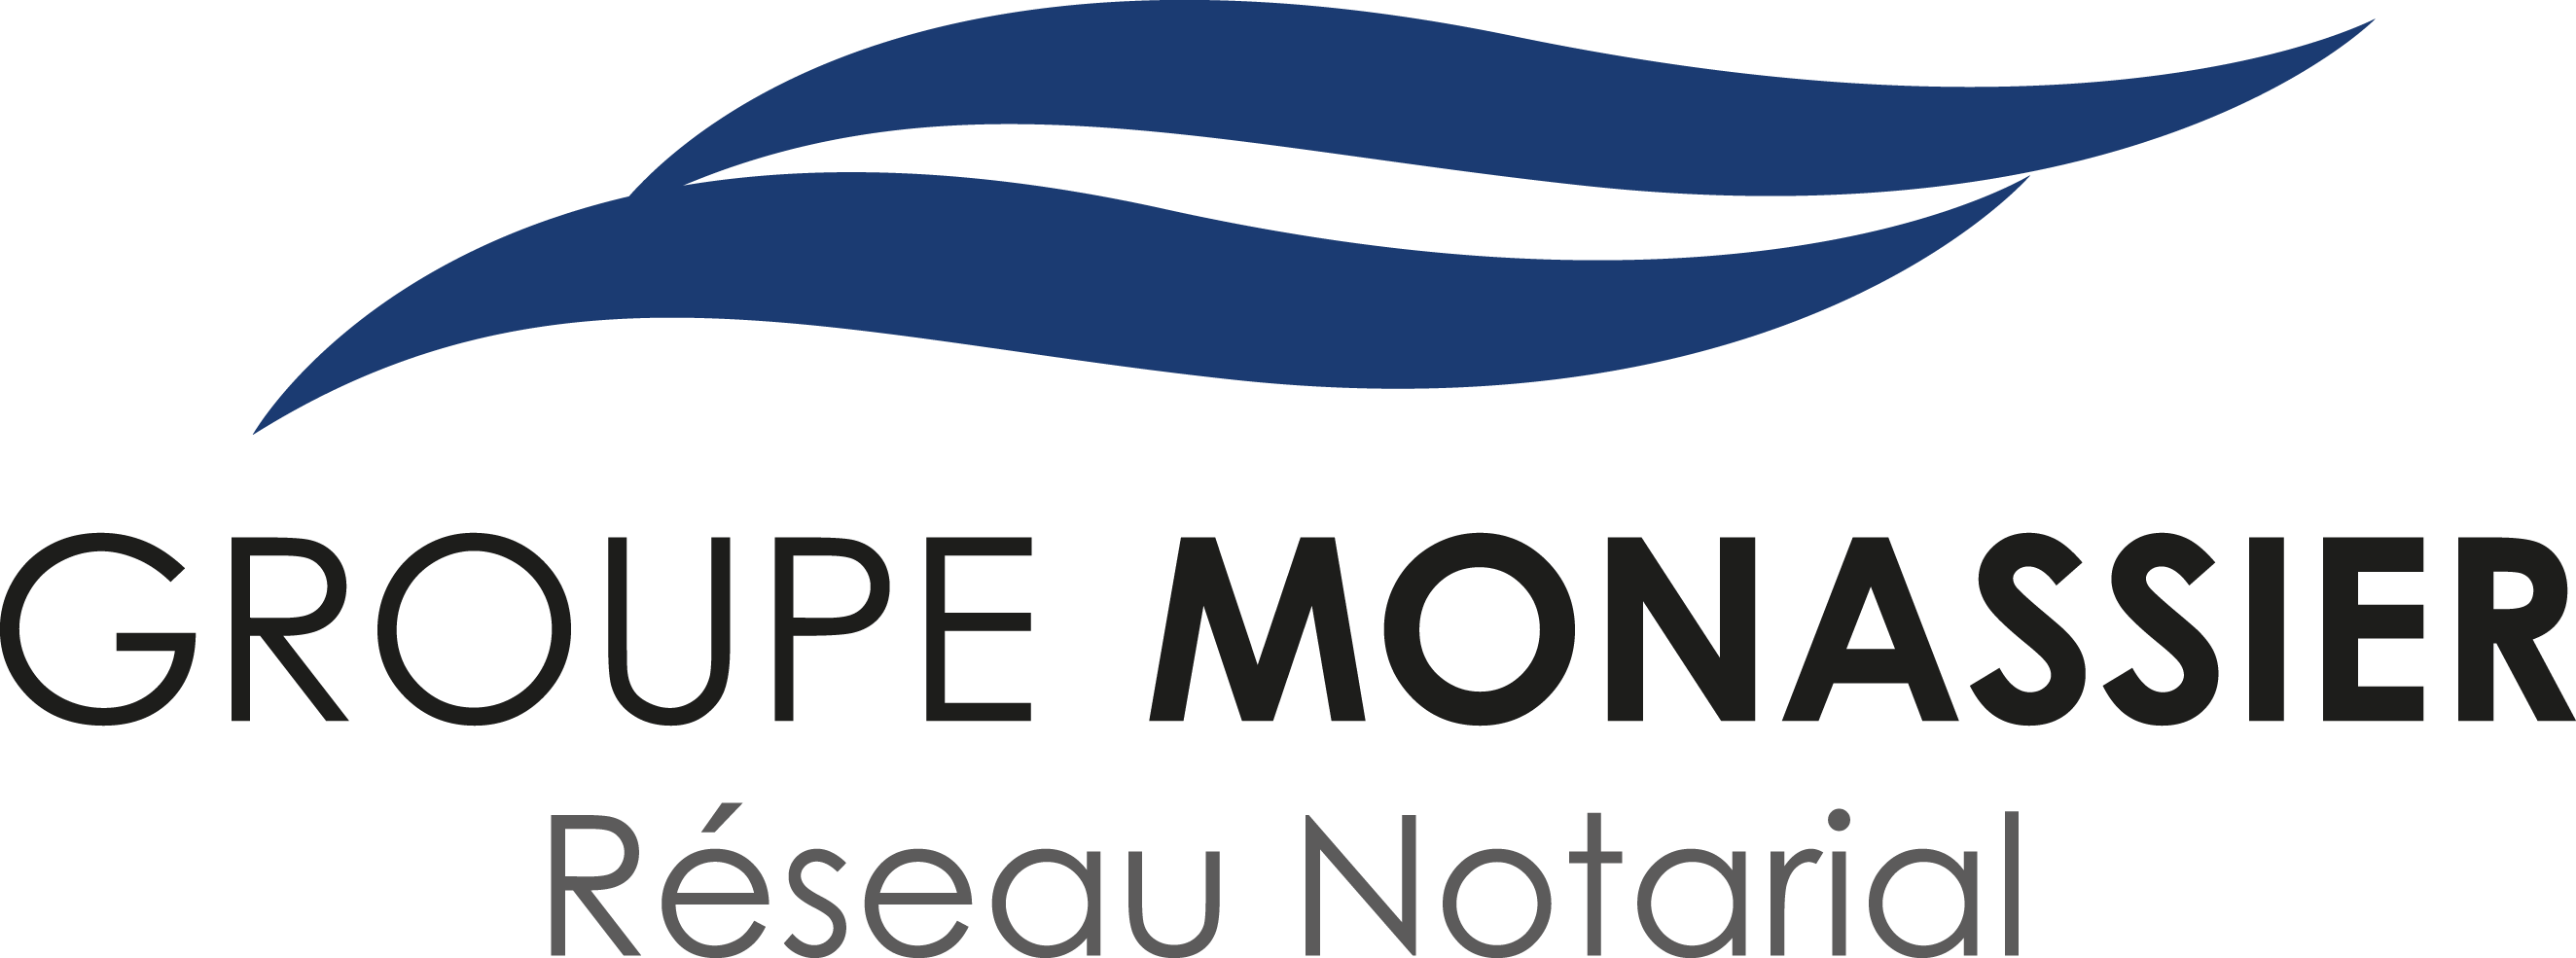 Groupe Monassier CHOLET NOTAIRES